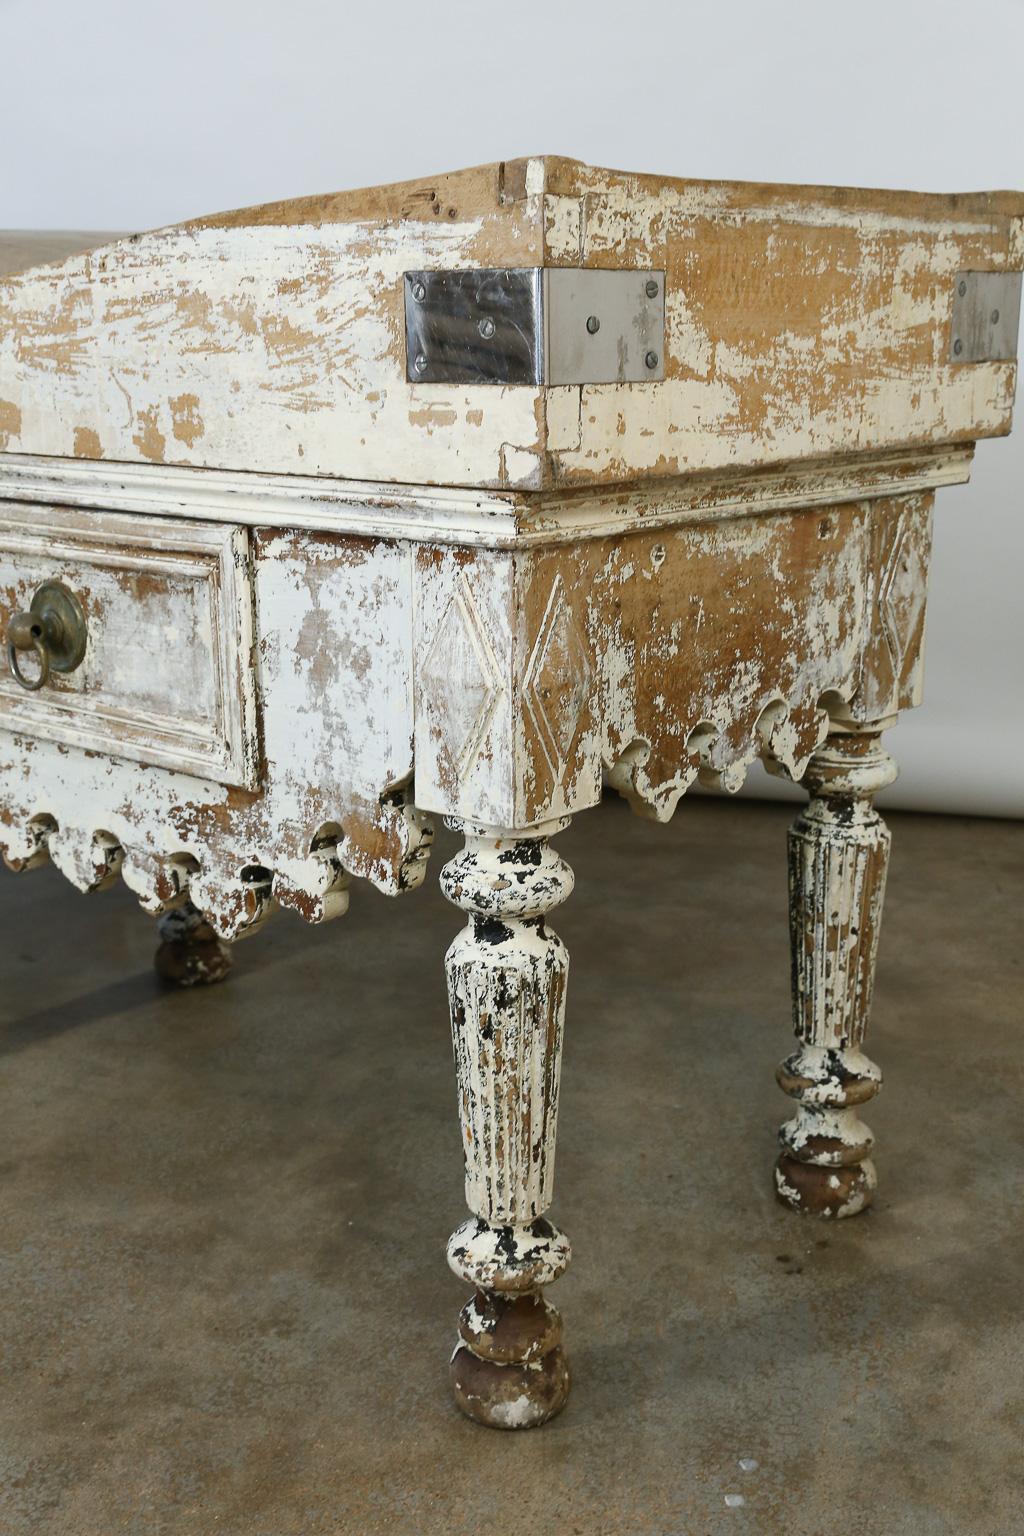 This late 19th century French butcher table features a beautiful marble top, a well used butcher block and three drawers for storage. The marble top measures 28